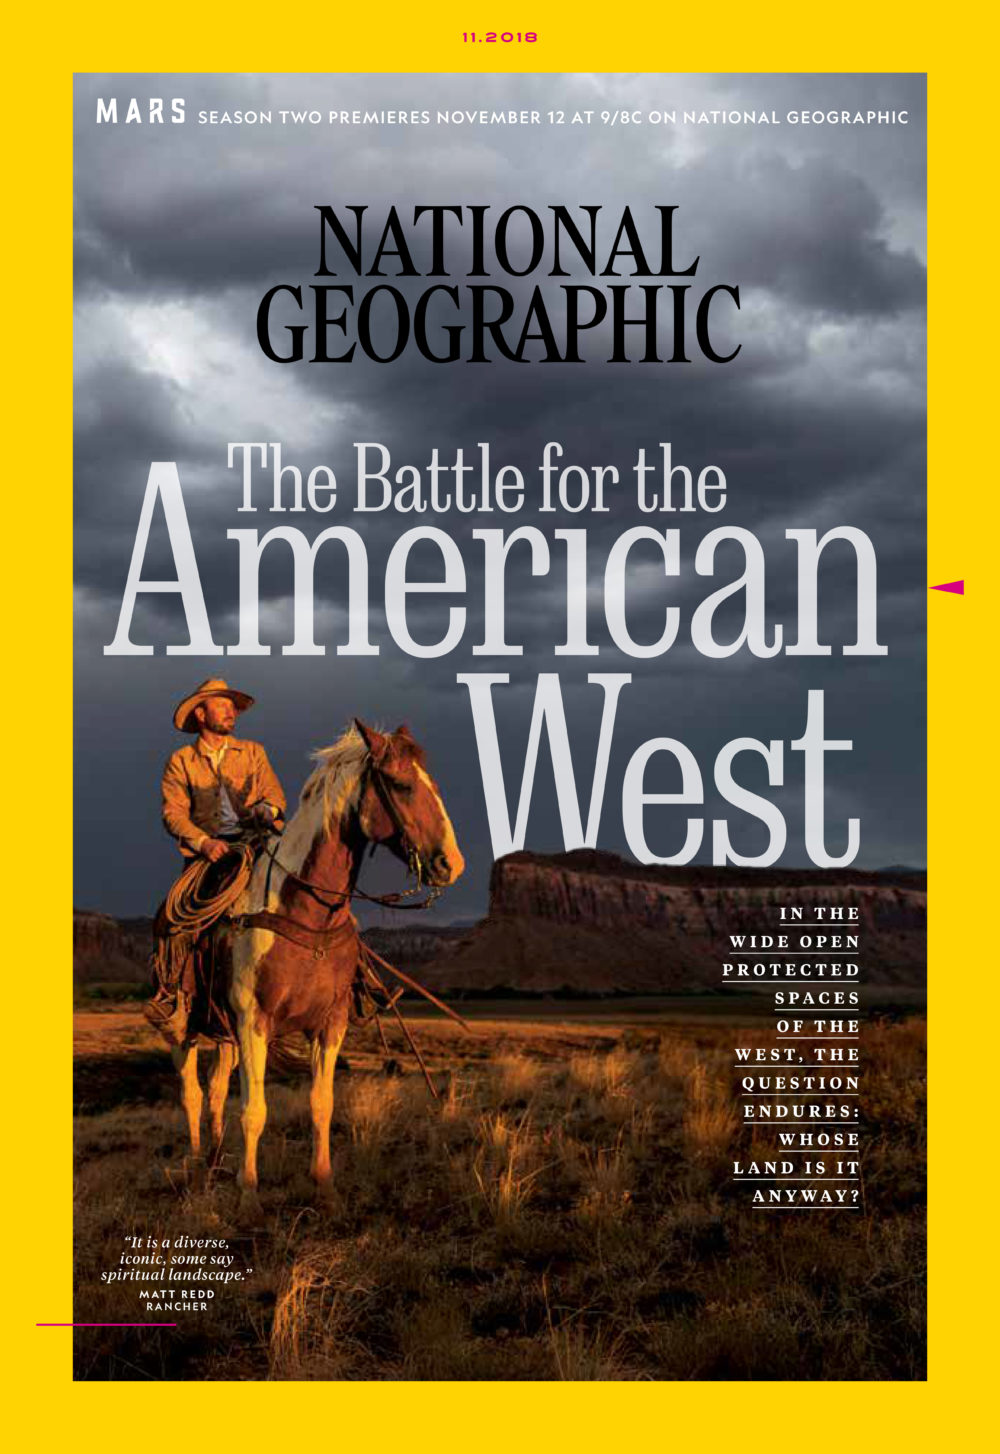 Cover of the 2018 print edition of National Geographic.